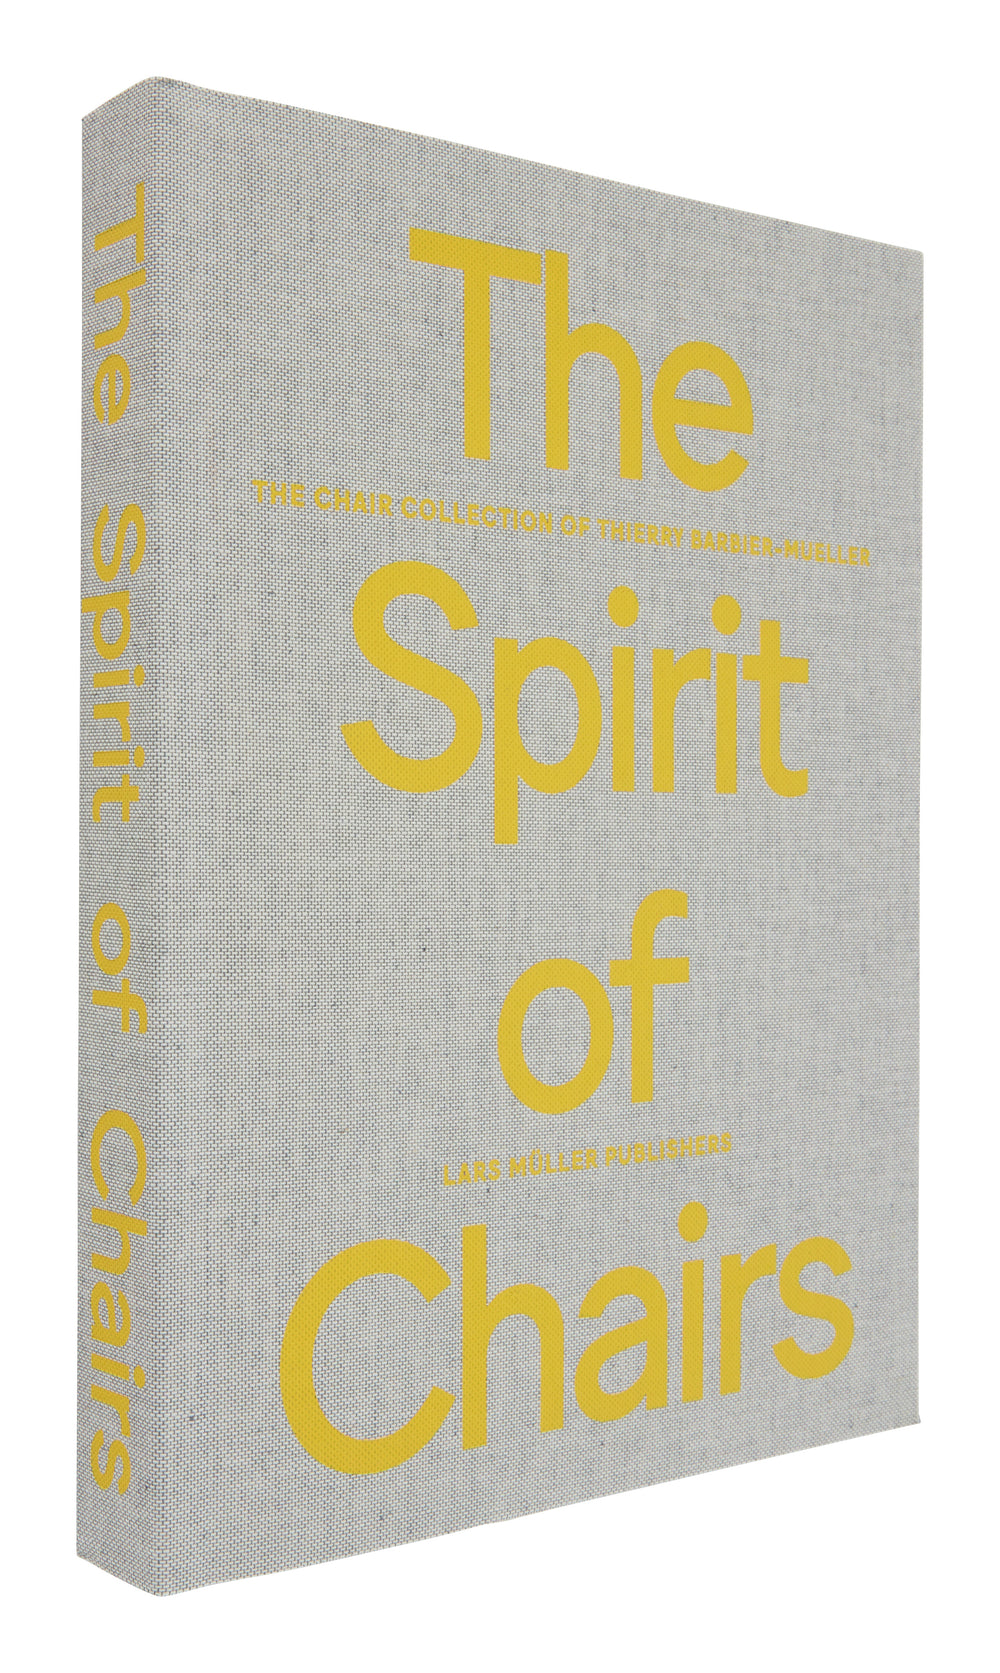 The Spirit of Chairs: The Chair Collection of Thierry Barbier-Mueller